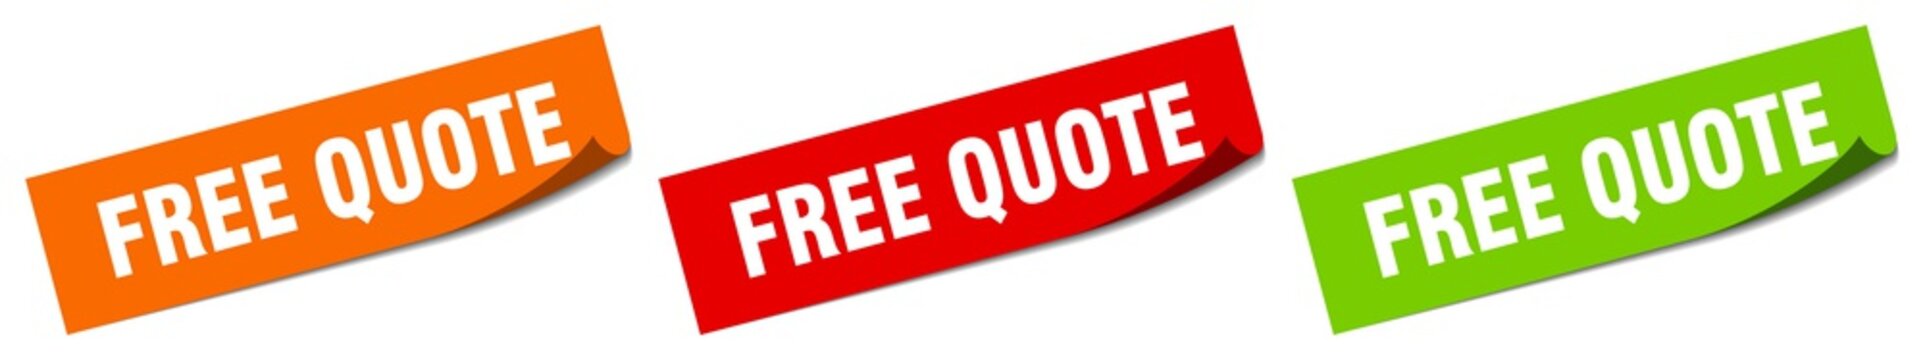 free quote sticker. free quote square isolated sign. free quote label